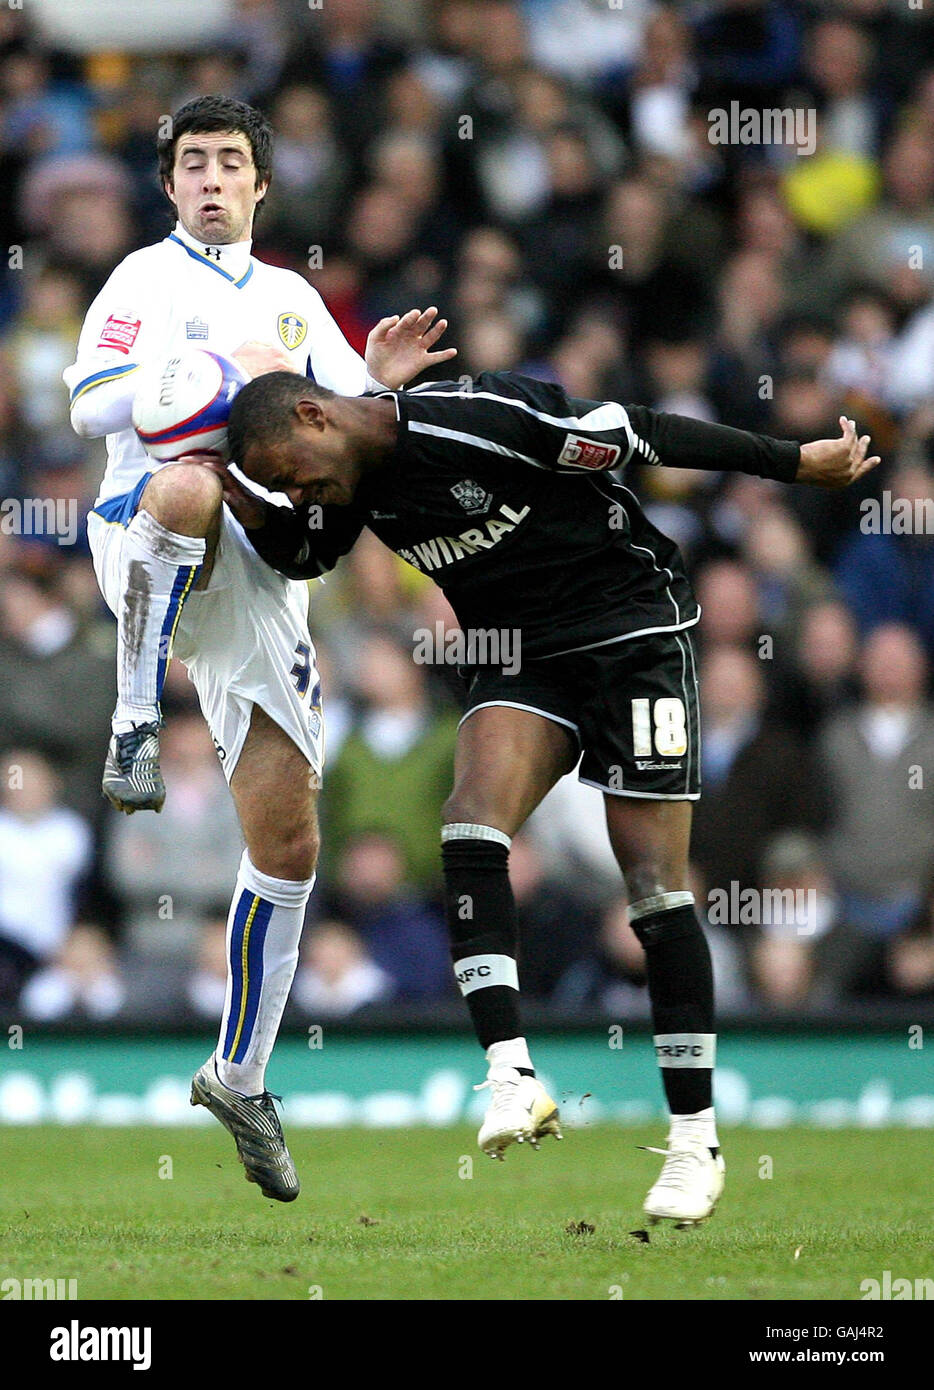 Tranmere Rovers Jennison Myrie-Williams and Leeds United's Alan Sheehan during the League One match at Elland Road, Leeds. Stock Photo